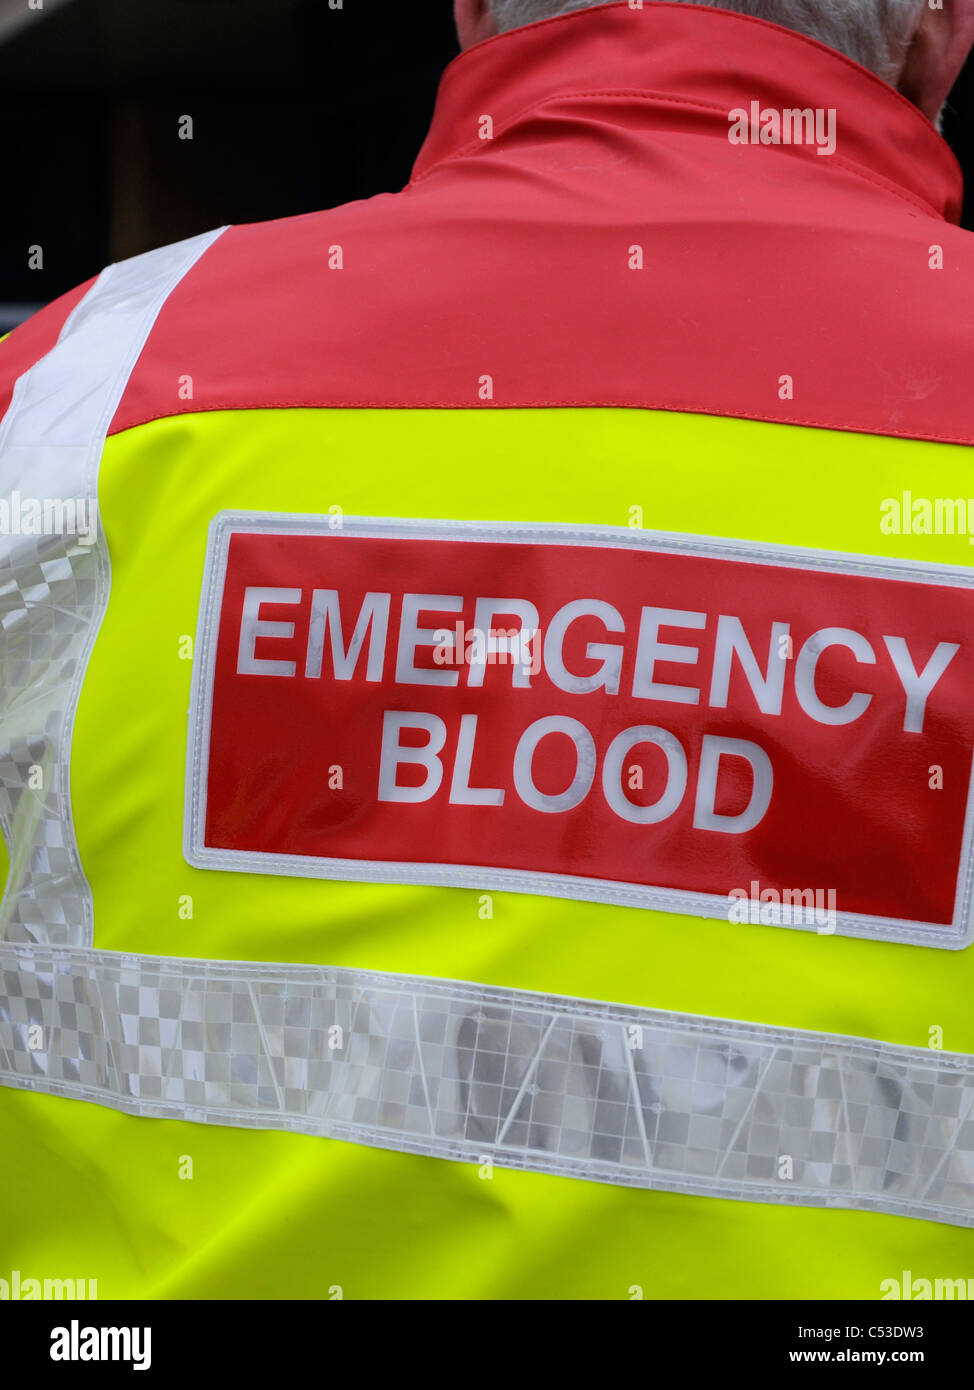 Emergency blood delivery man, supplying and transporting blood in an emergency. Stock Photo